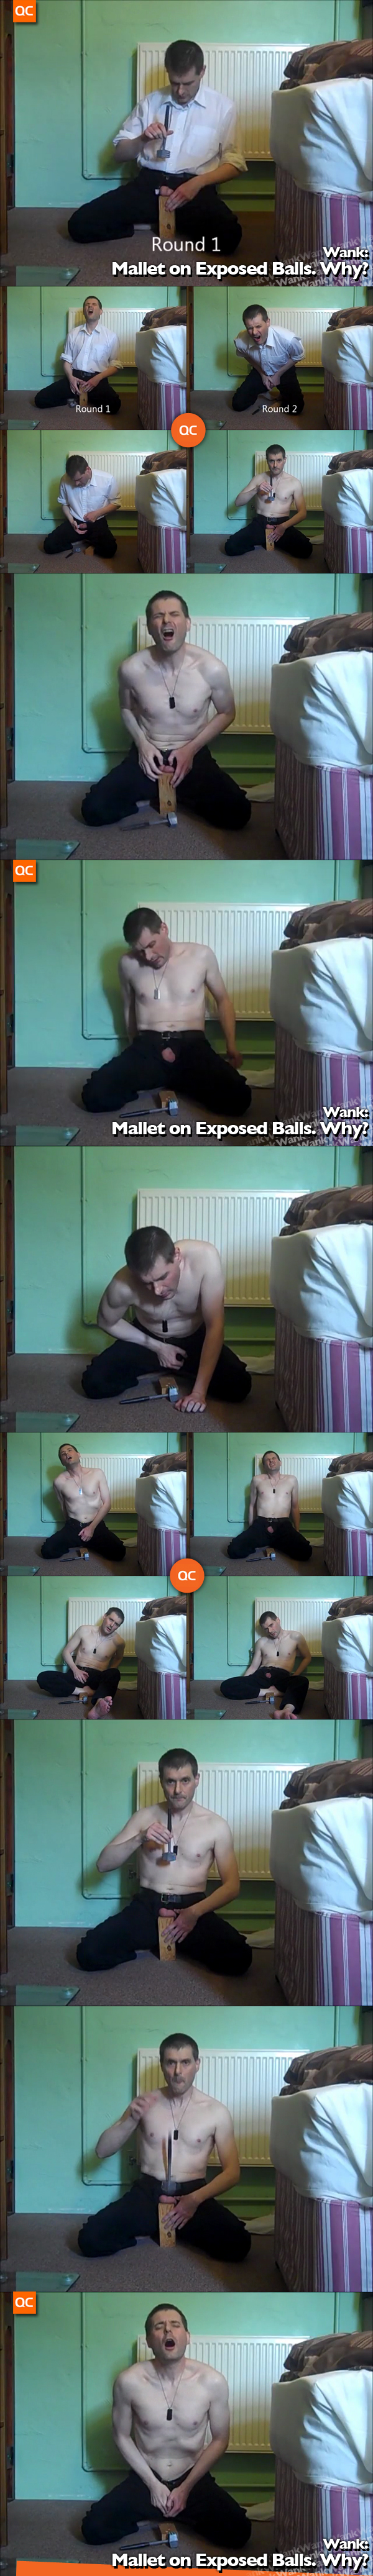 Wank: Mallet on Exposed Balls. Why?